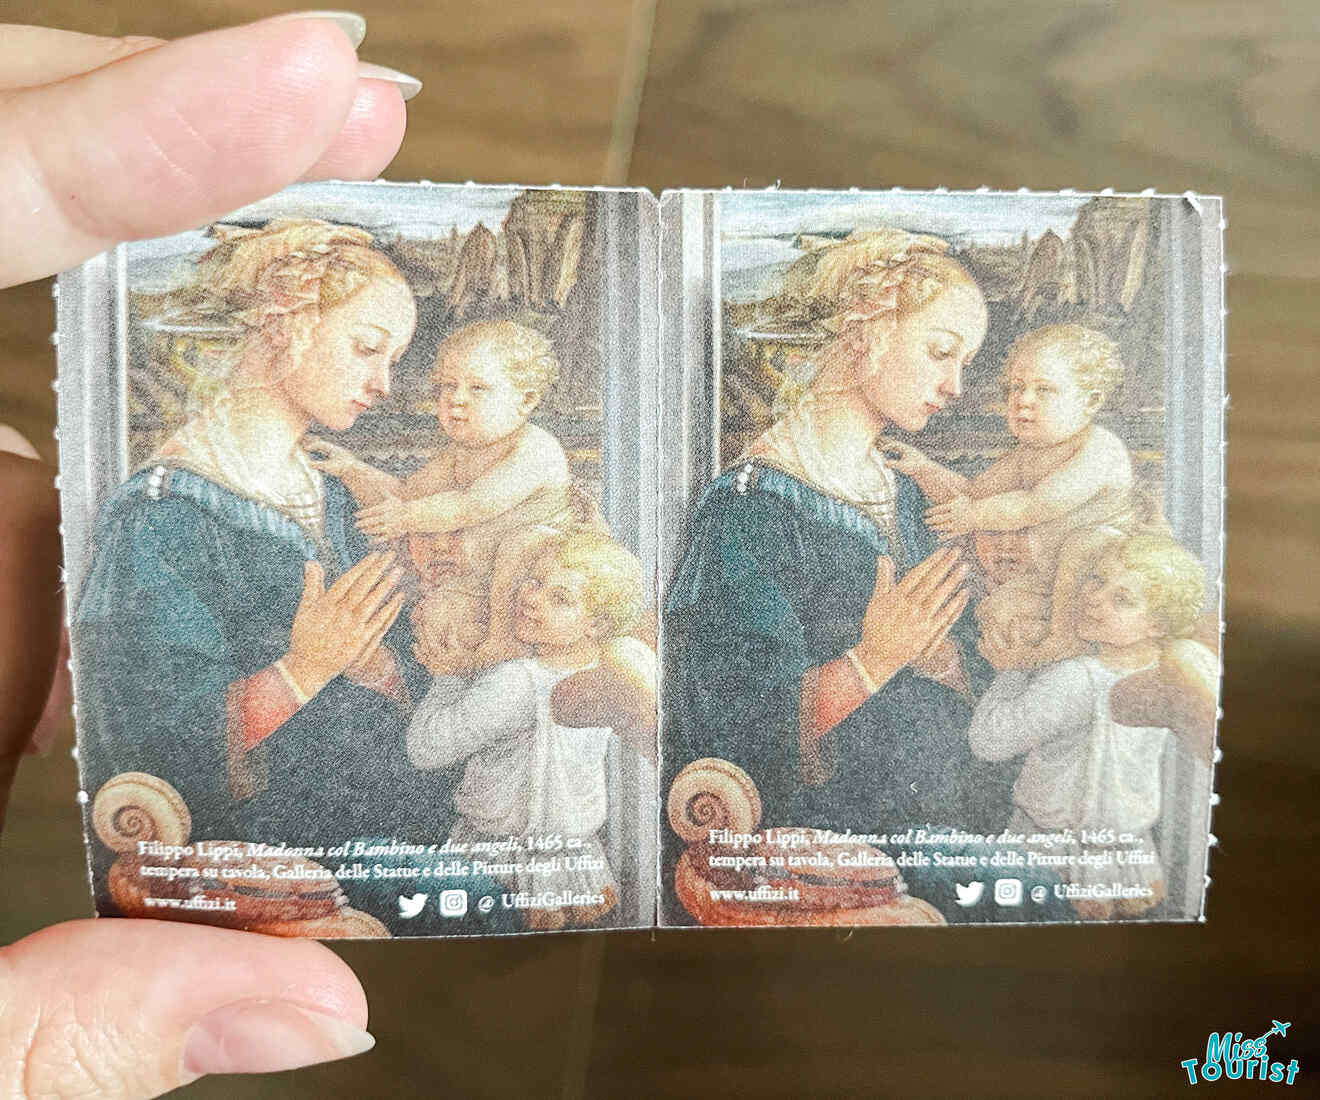 A picture of the Uffizi Gallery tickets featuring a painting of a lady and two babies